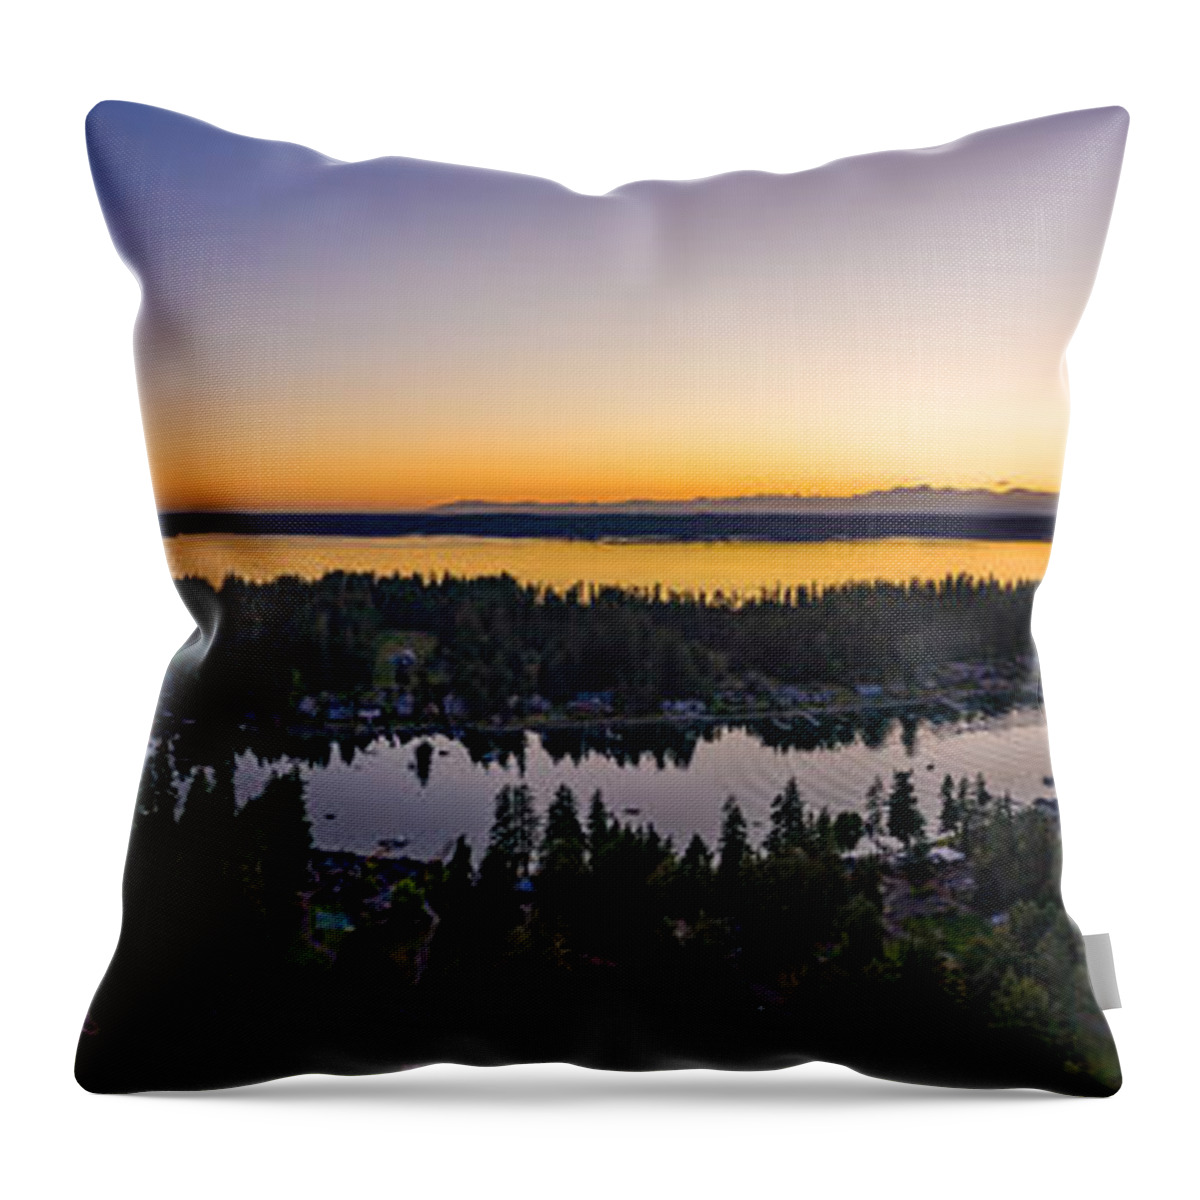 Drone Throw Pillow featuring the photograph Horsehead Bay Pano by Clinton Ward